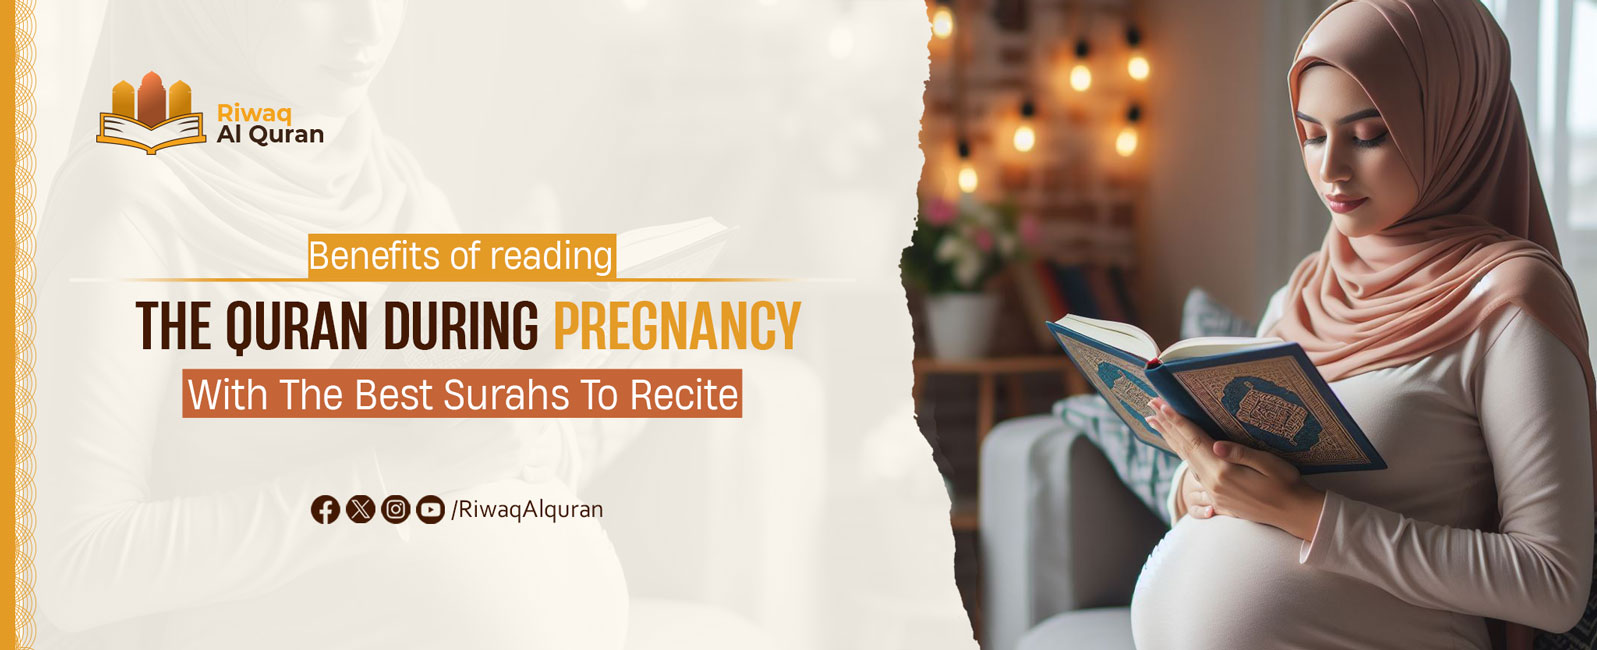 Benefits of reading the Quran during pregnancy With The Best Surahs To Recite